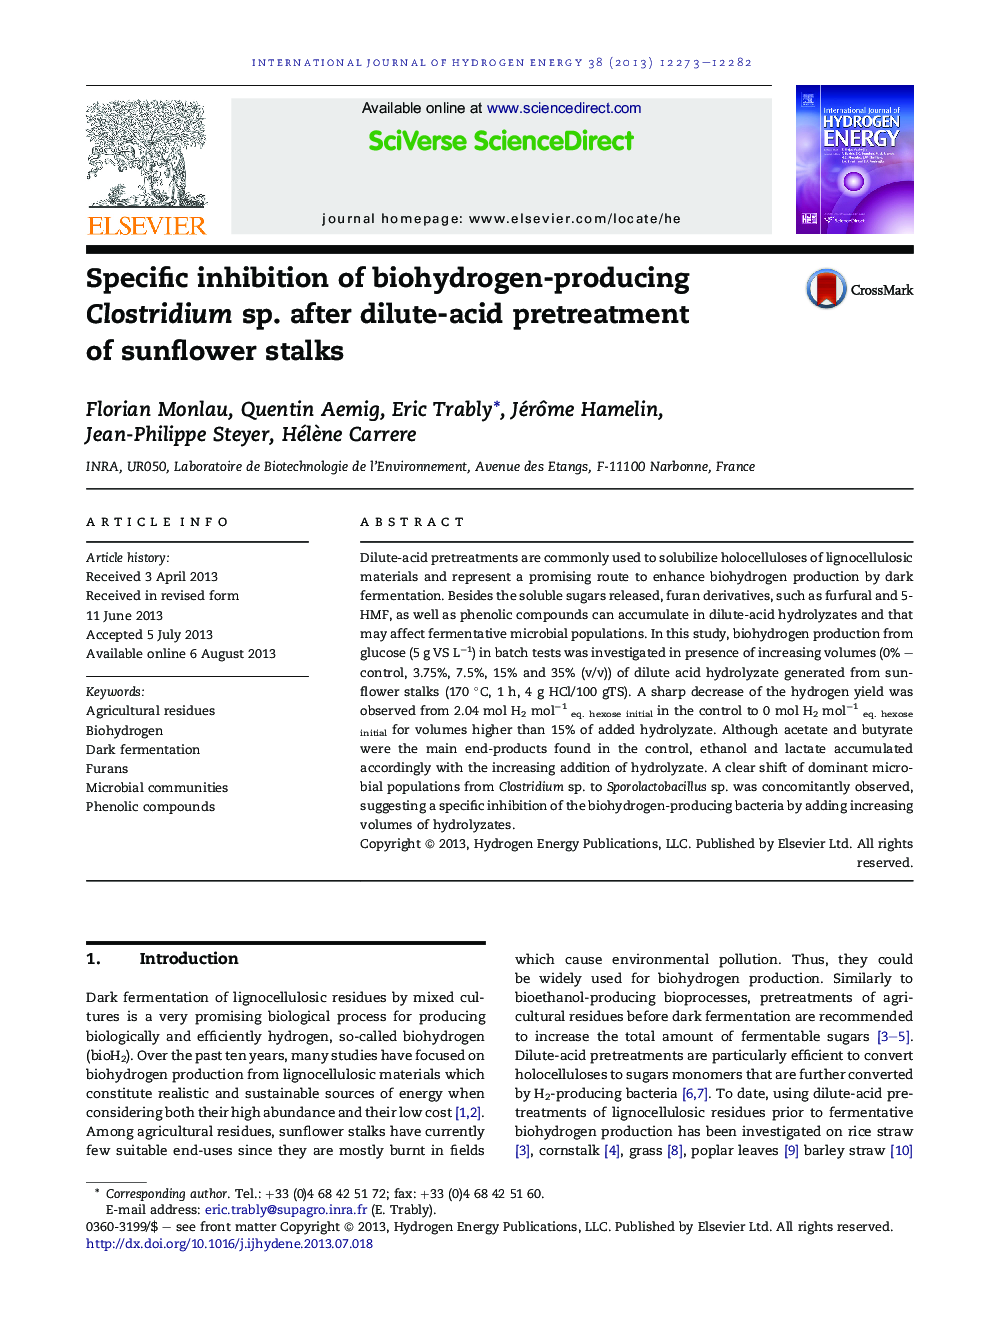 Specific inhibition of biohydrogen-producing Clostridium sp. after dilute-acid pretreatment of sunflower stalks